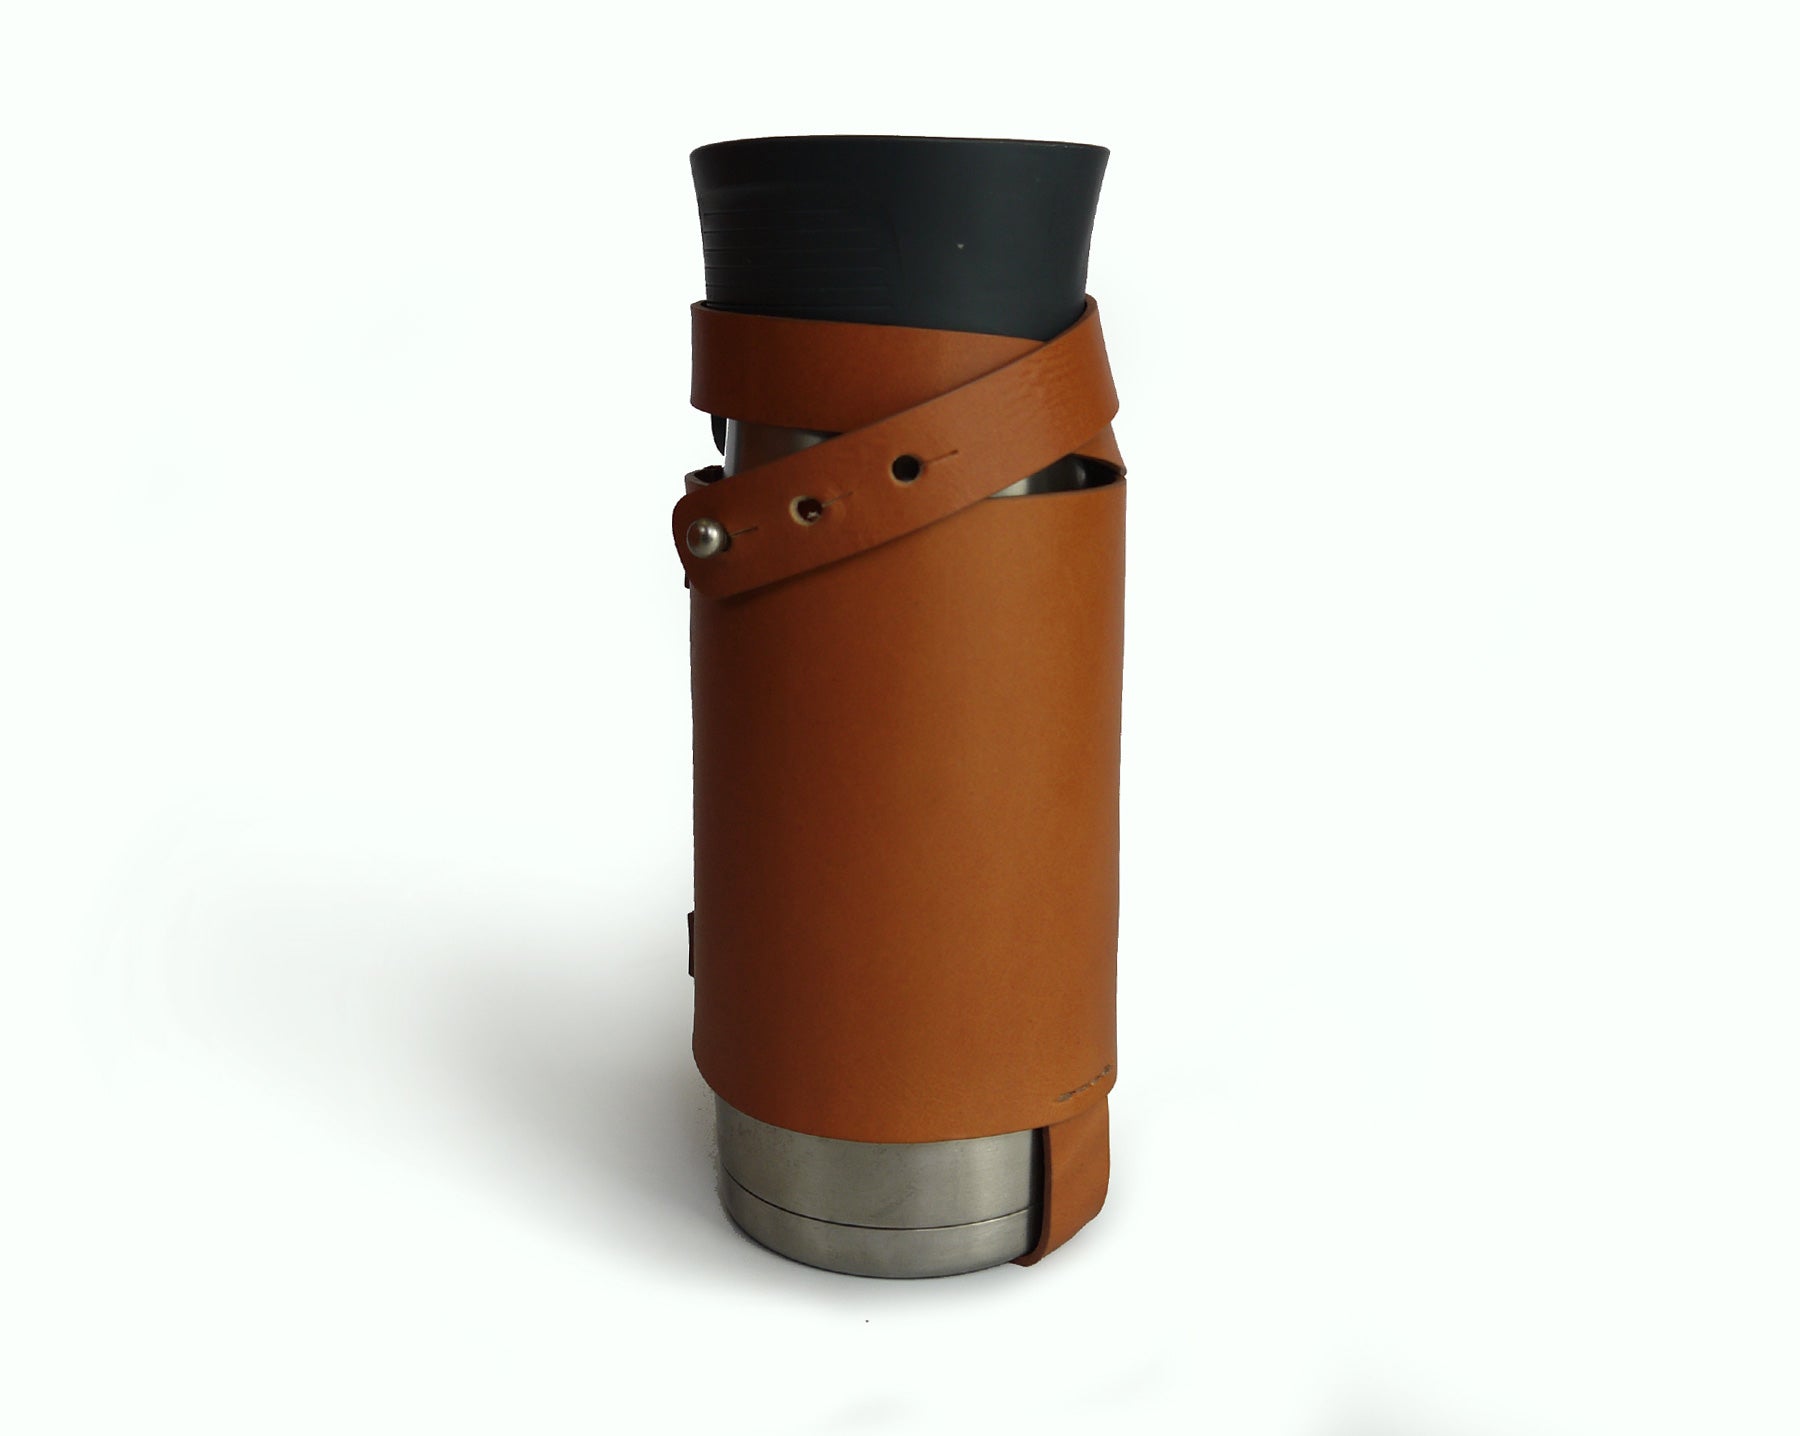 Basader Bottle Holder in English Tan full grain leather with a coffee thermos